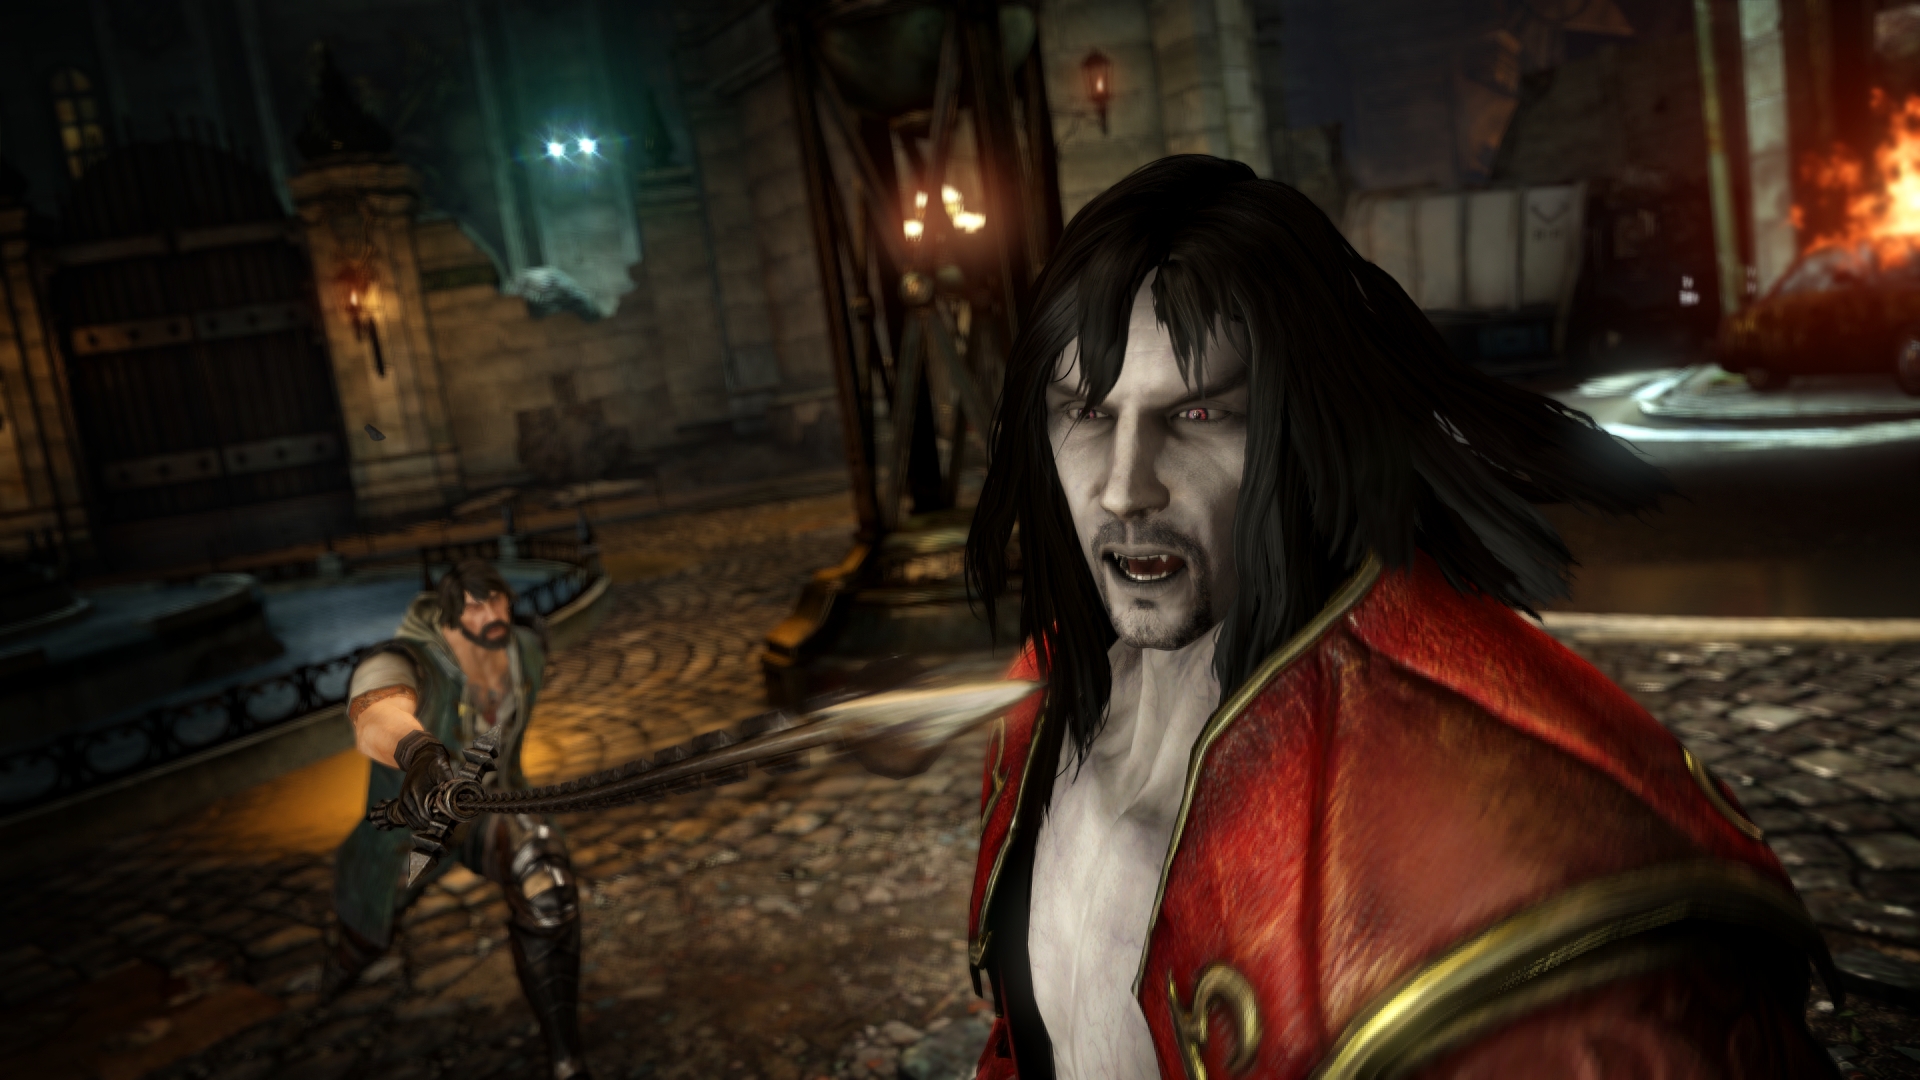 Castlevania: Lords of Shadow 2 Screenshots And Concept Art Released